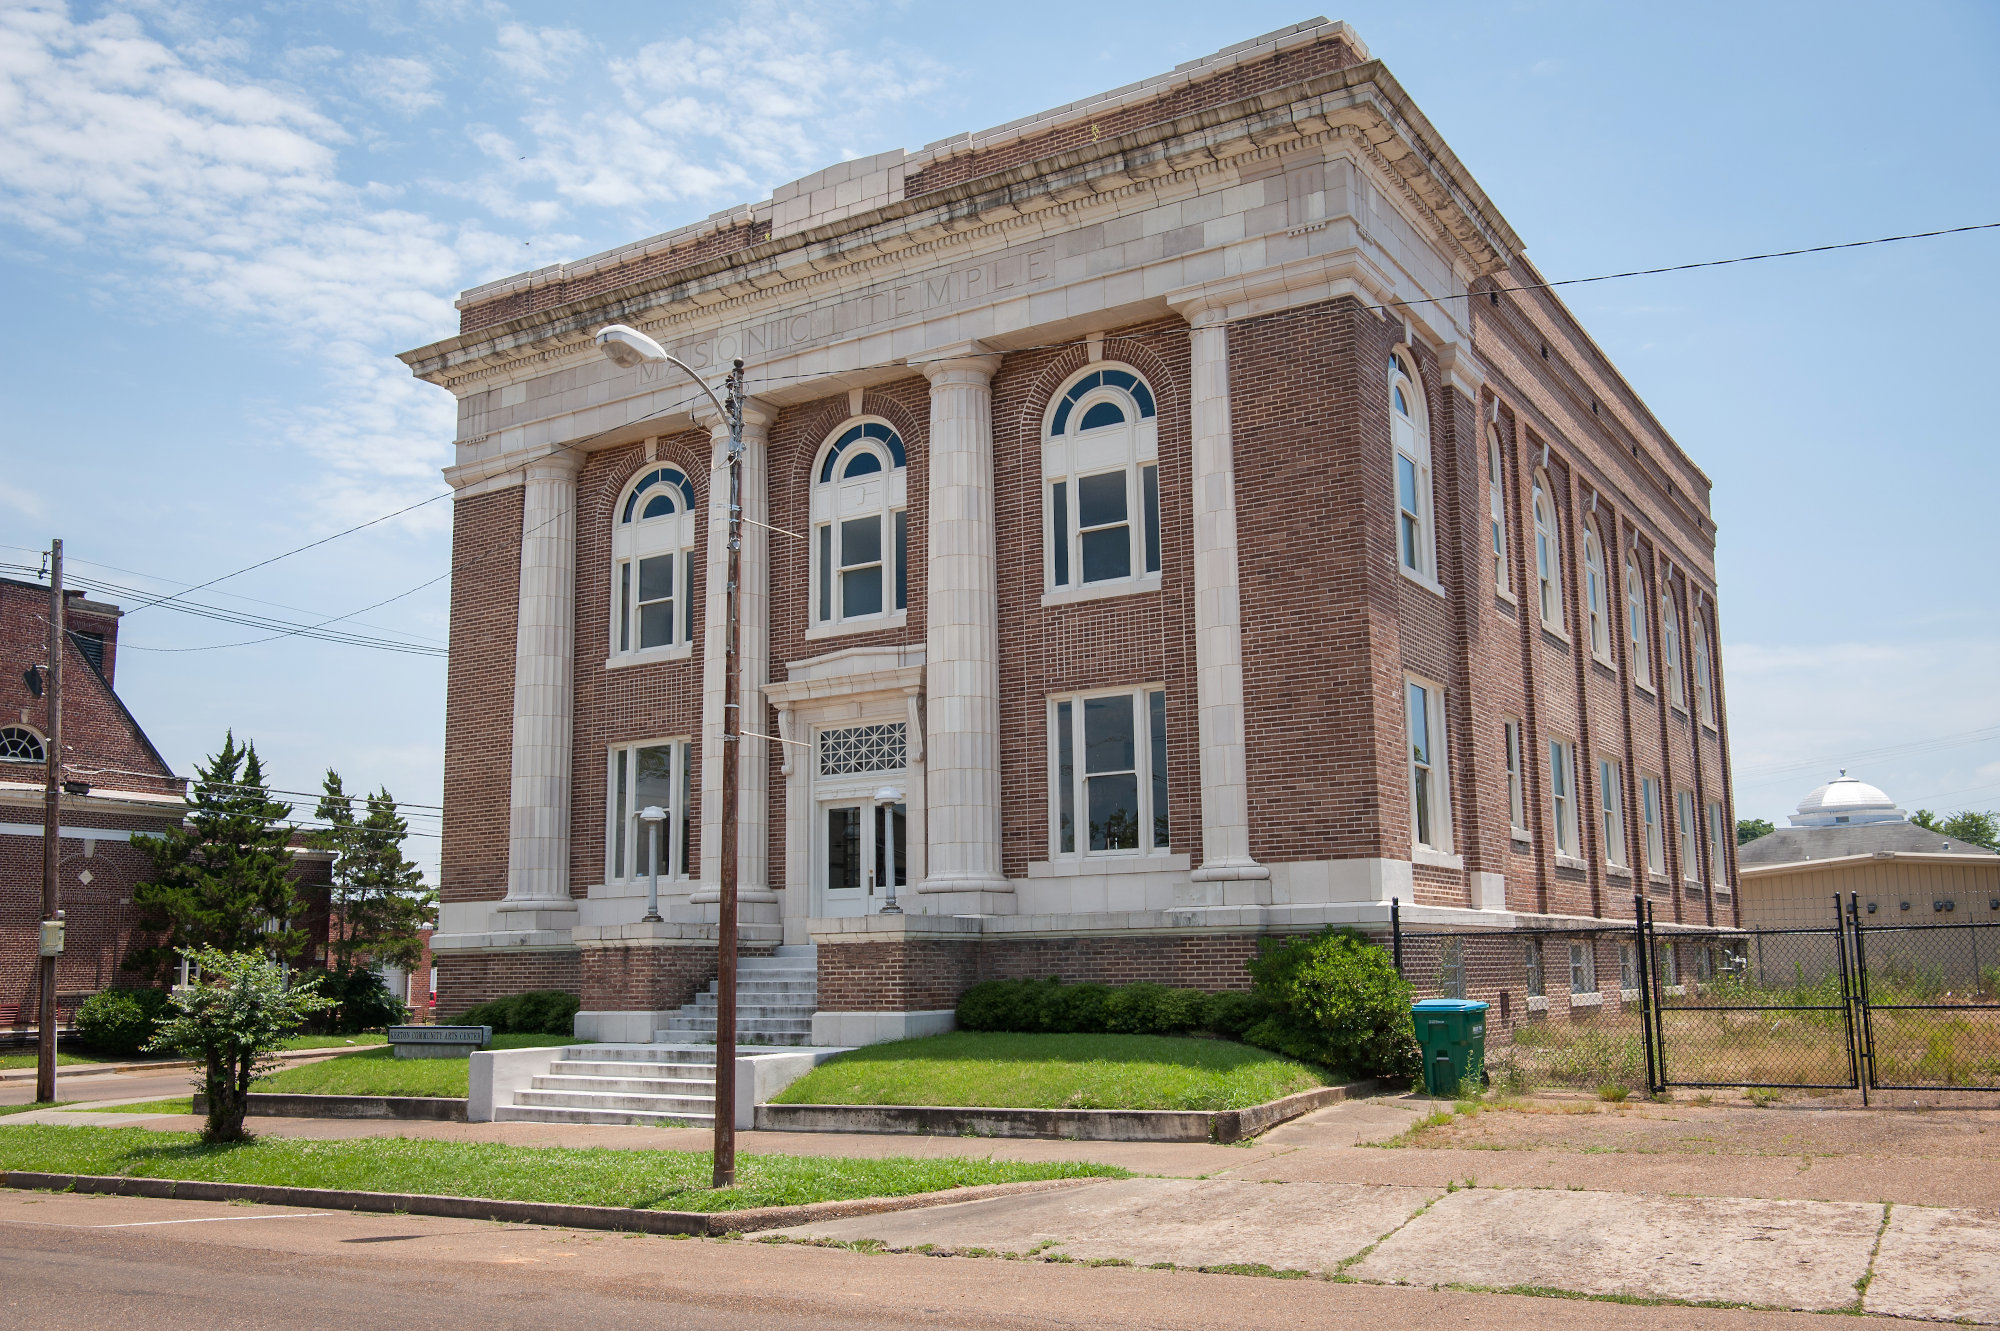 Large brick building for the Masonic Temple in downtown Grenada, MS.